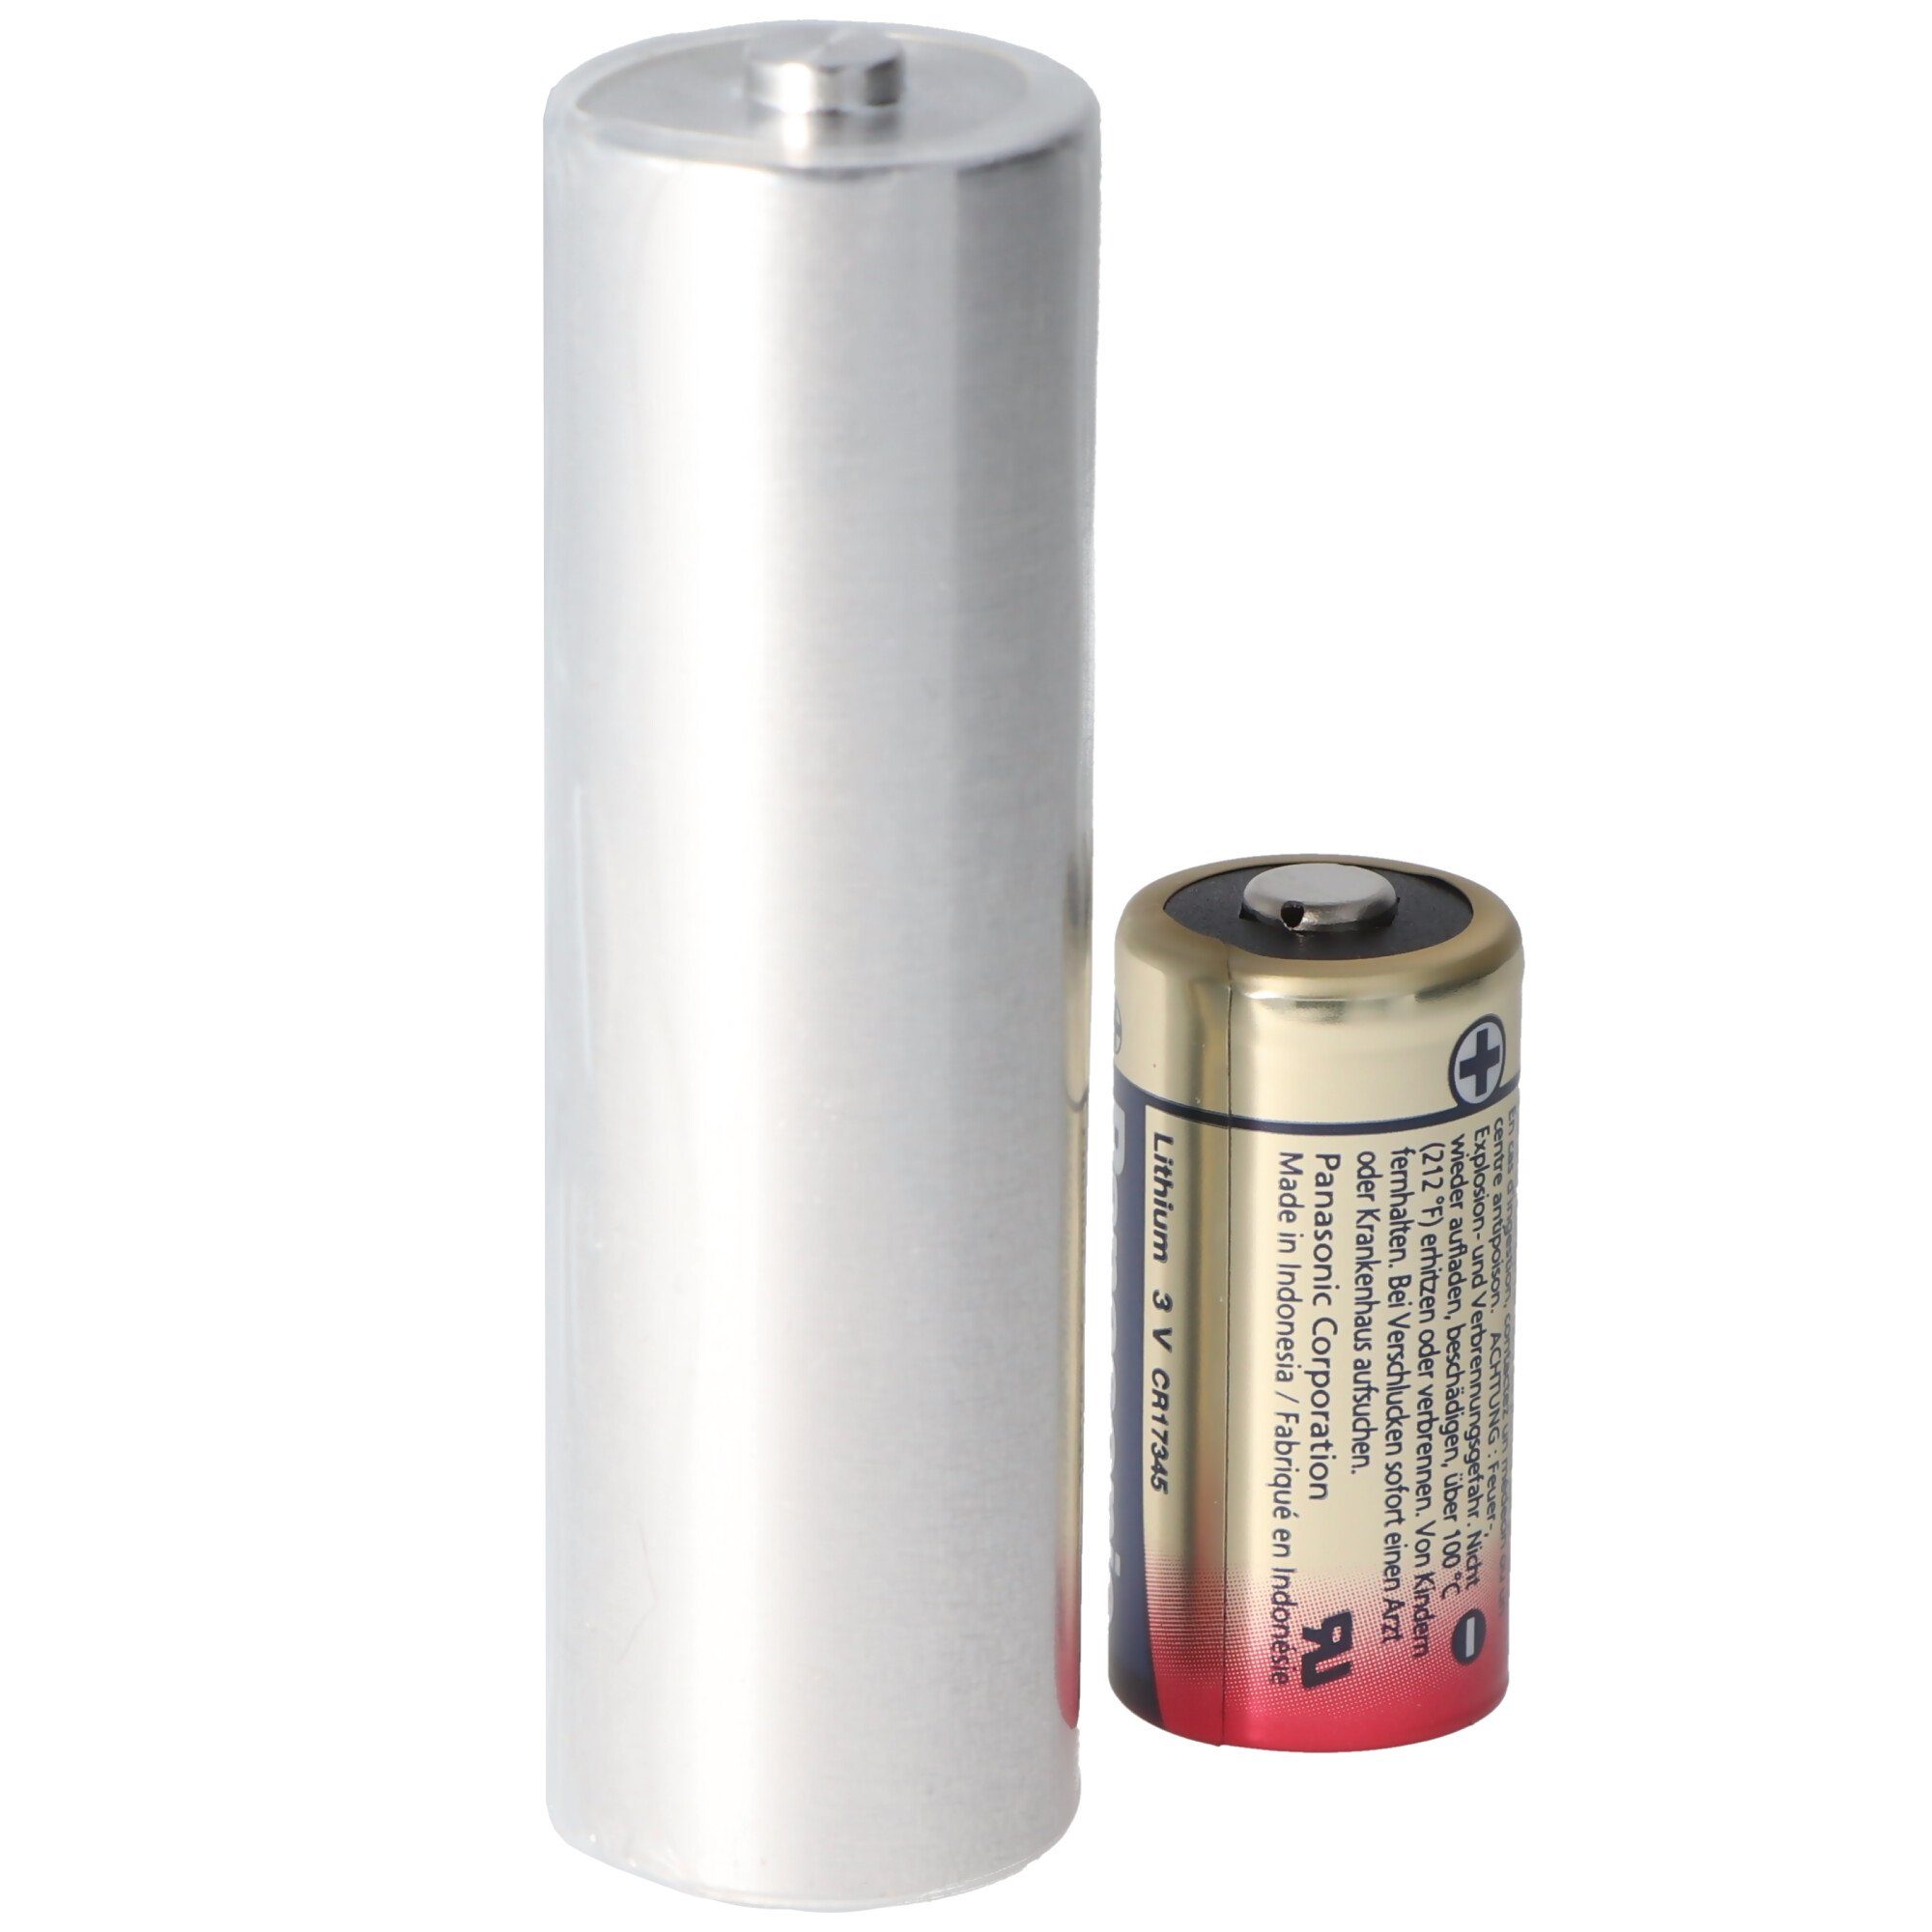 2R10R, 2R10 3,0 Vo Duplex 2010, Batterie Adapter Batterie Stab-Batterie, 3010, AccuCell